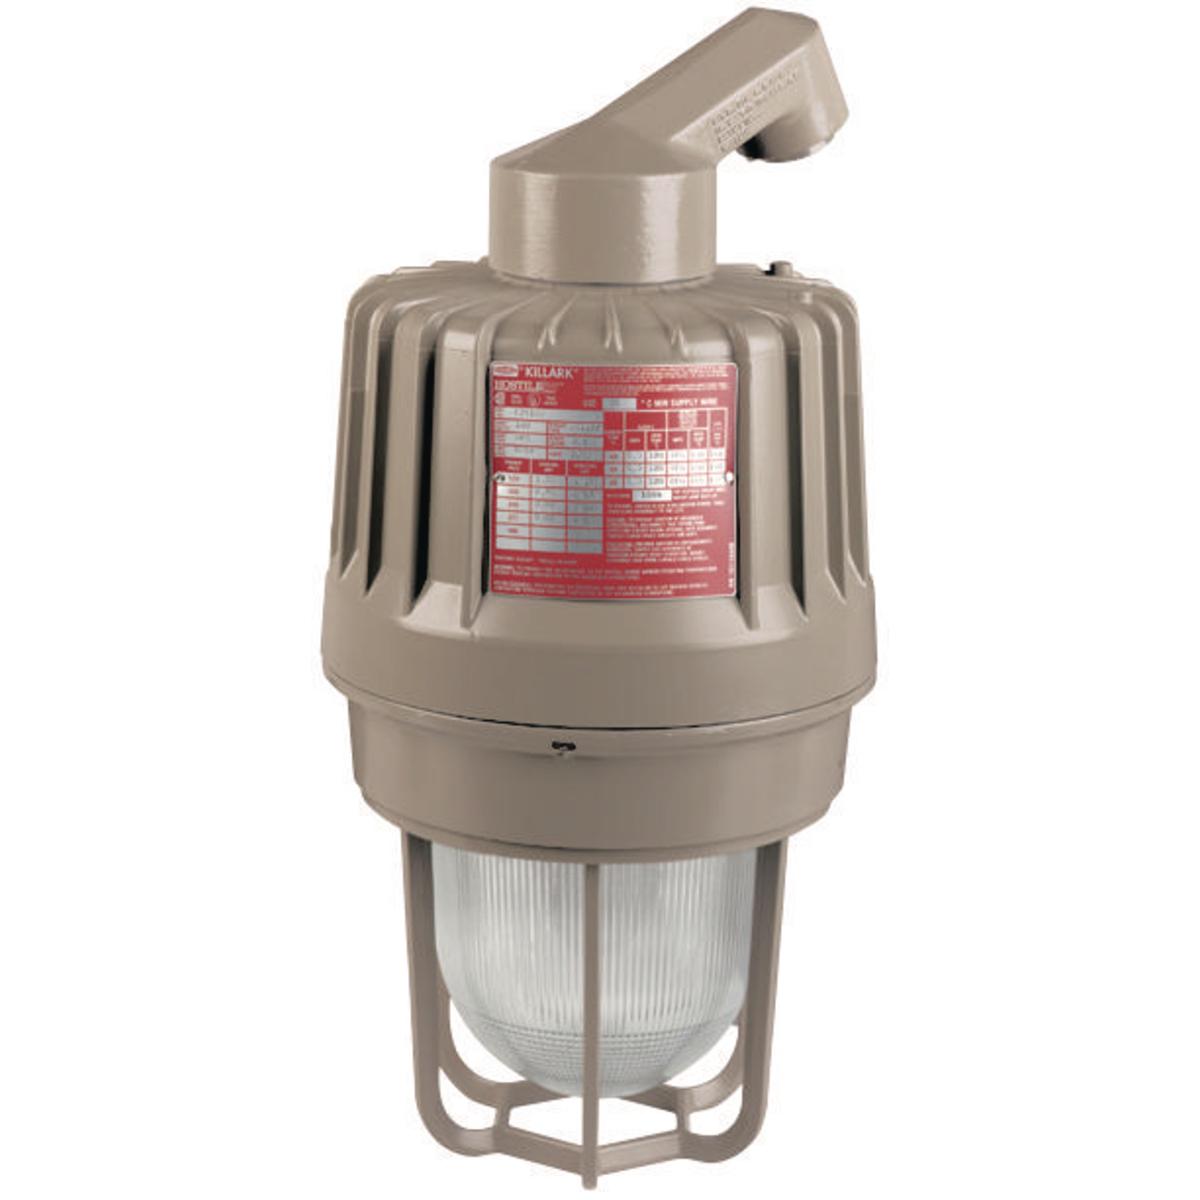 Hubbell EZL12530D4G EZL 120-277V 1-1/4" 25 Degree Stanchion Mount Fluted Globe with Guard  ; The EZL Series LED High Bay/ Low Bay fixtures are high quality explosion proof light fixtures. Designed to go into the harshest environments where explosive vapors are present .